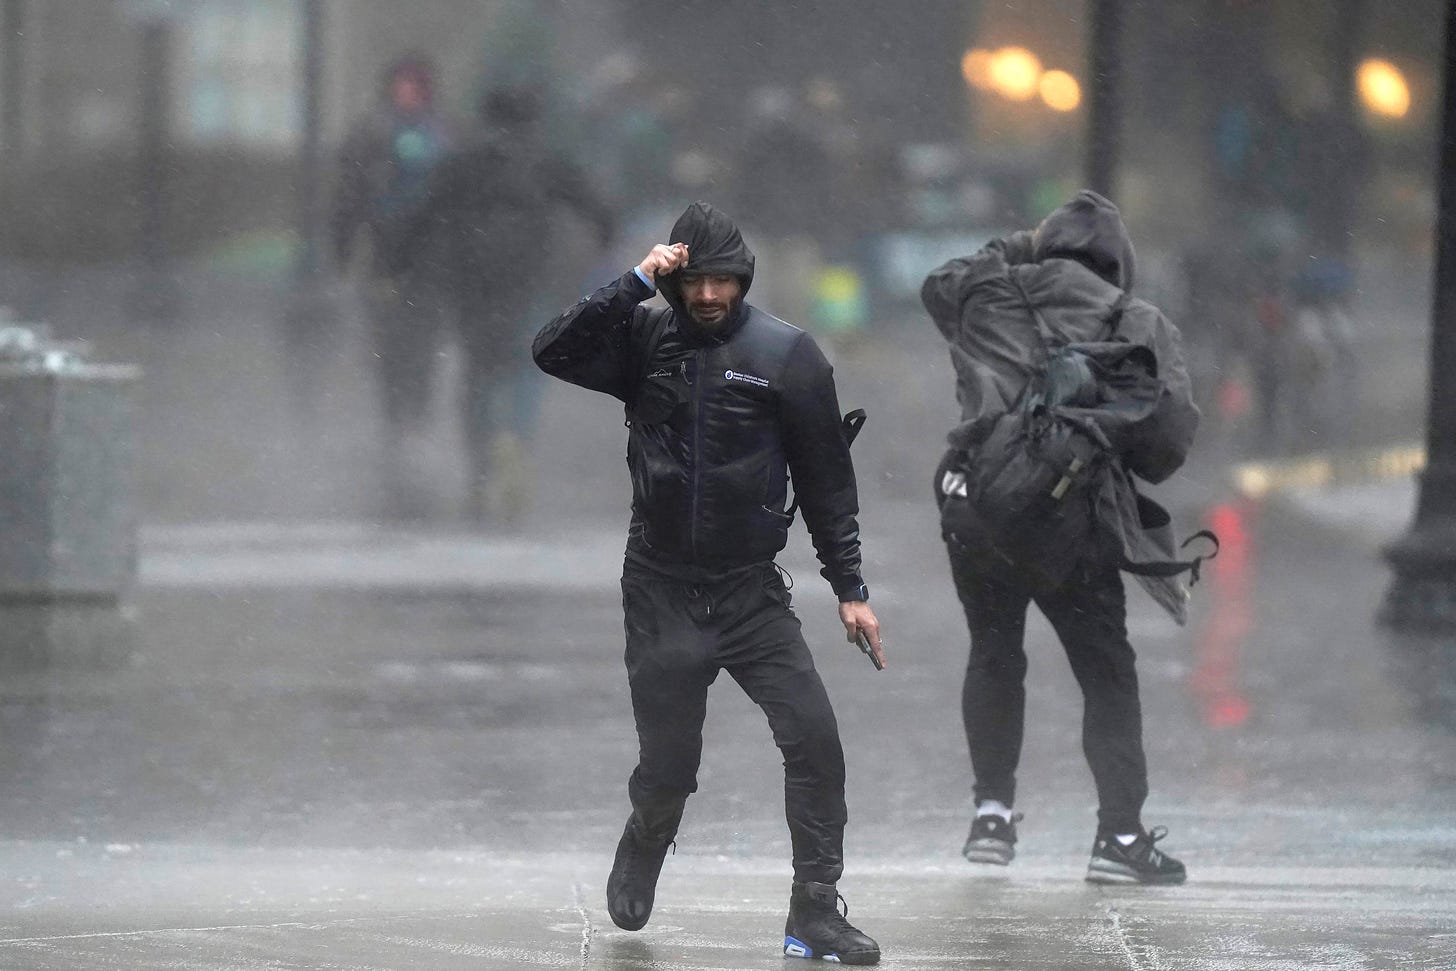 Pedestrians are buffeted by wind and rain.